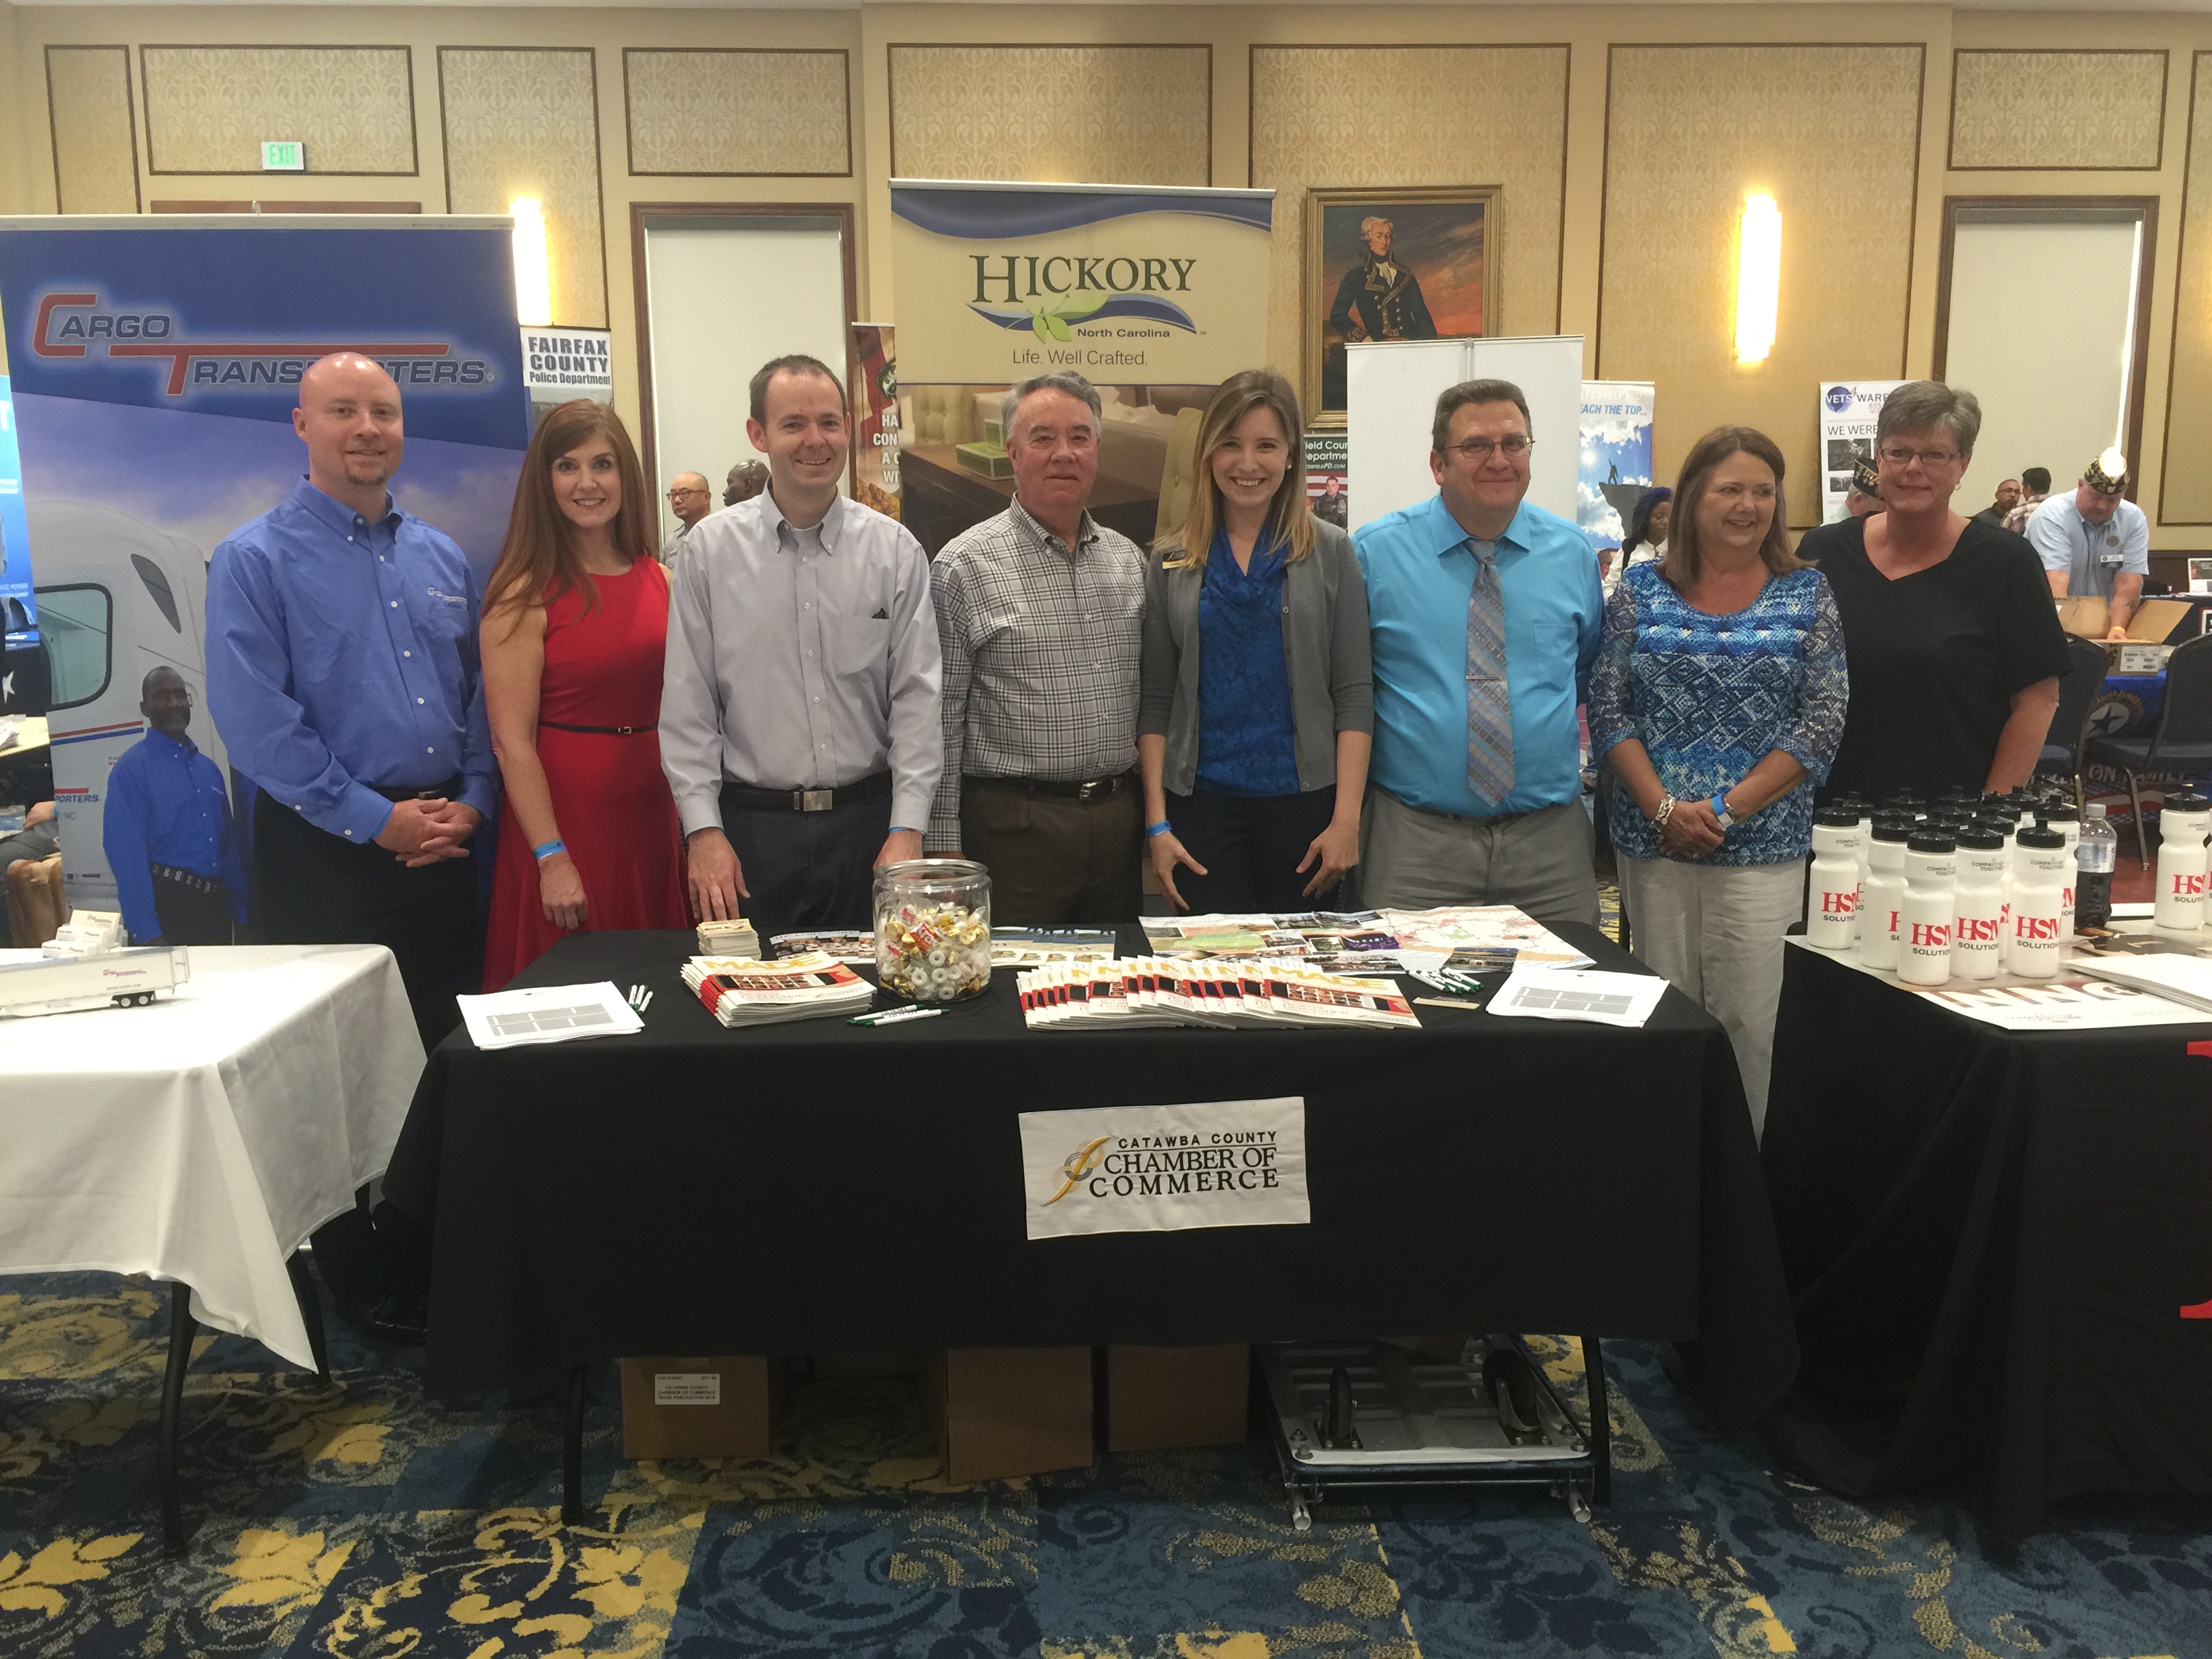 Catawba County attendees at the Hiring for Heroes Job Fair at Fort Bragg. Shown (from left) are Shawn Brown, Shelly Mundy, Nathan Huret, Danny Hearn, Lindsay Keisler, Russ Vickers, Paula Howe, Mary Kay Rayfield.